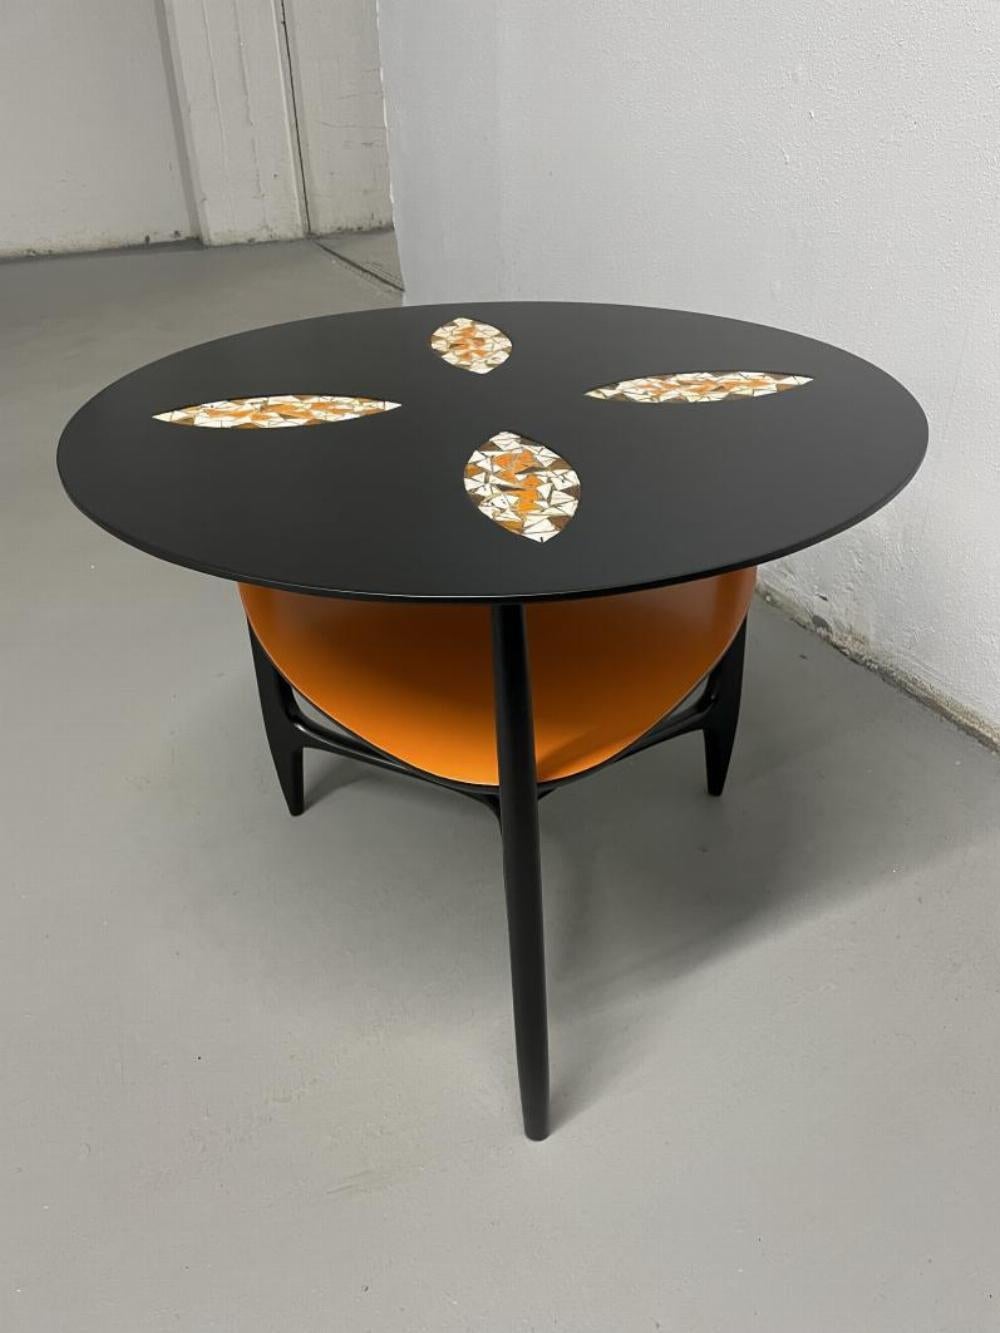 Italian Mid Century side table with Vintage Hand Painted Tile Inset. For Sale